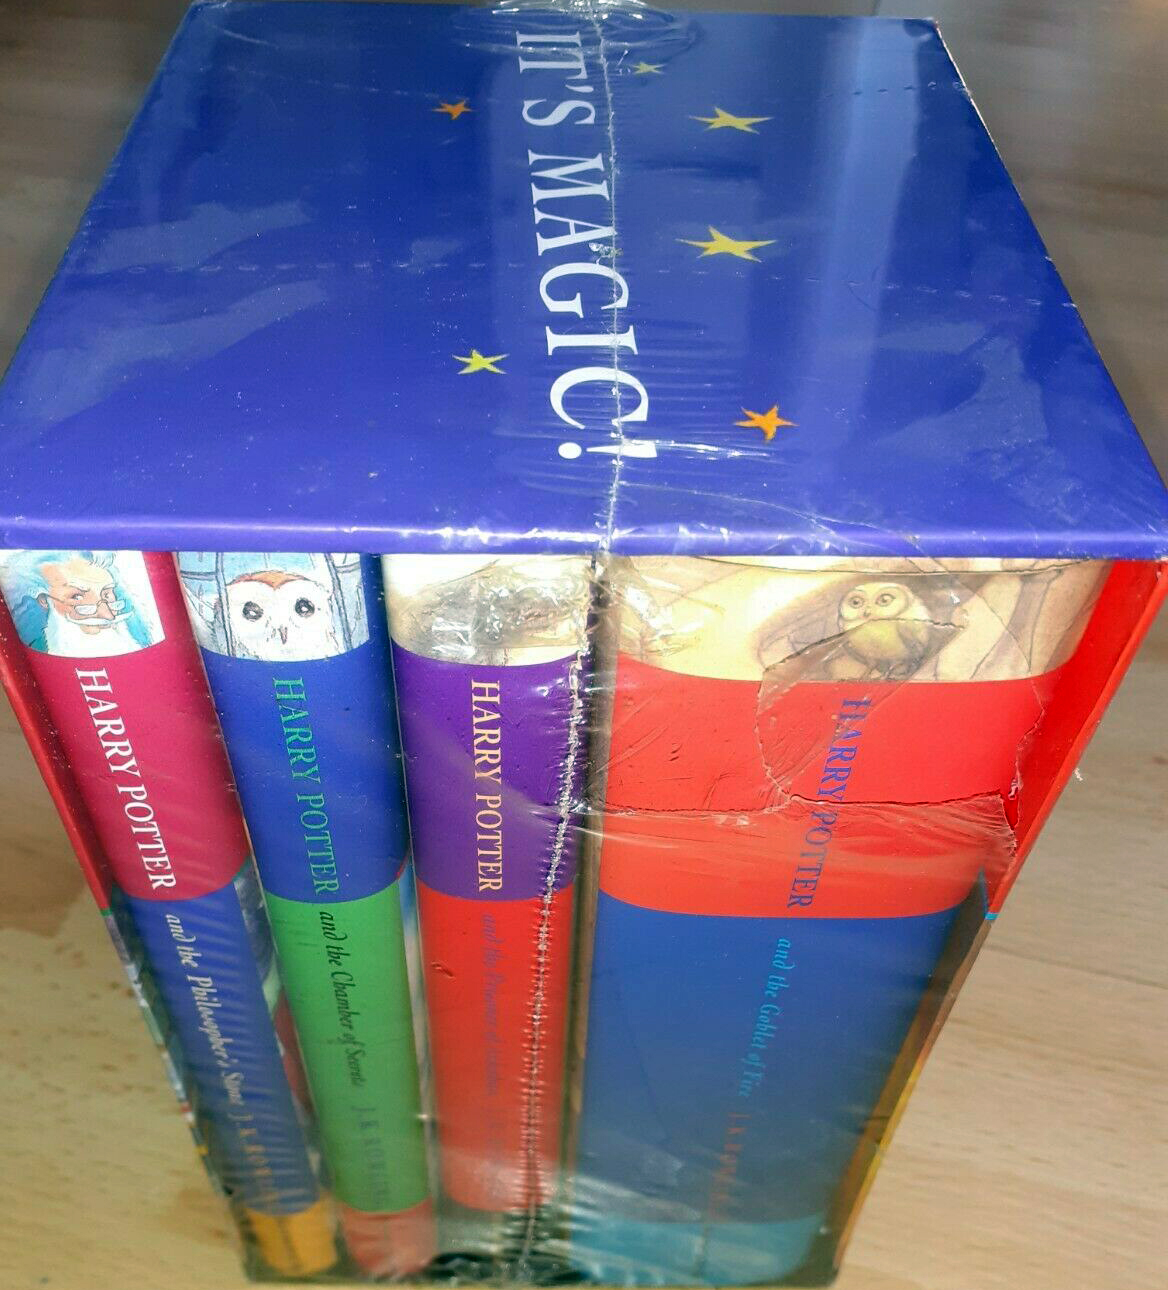 SALE! Harry Potter Hardback BLOOMSBURY Box Set: Volumes 1-4 - SEALED! by  J.K. Rowling * NEW - still SEALED!! *: New Hardcover (2000) 5th or later  Edition